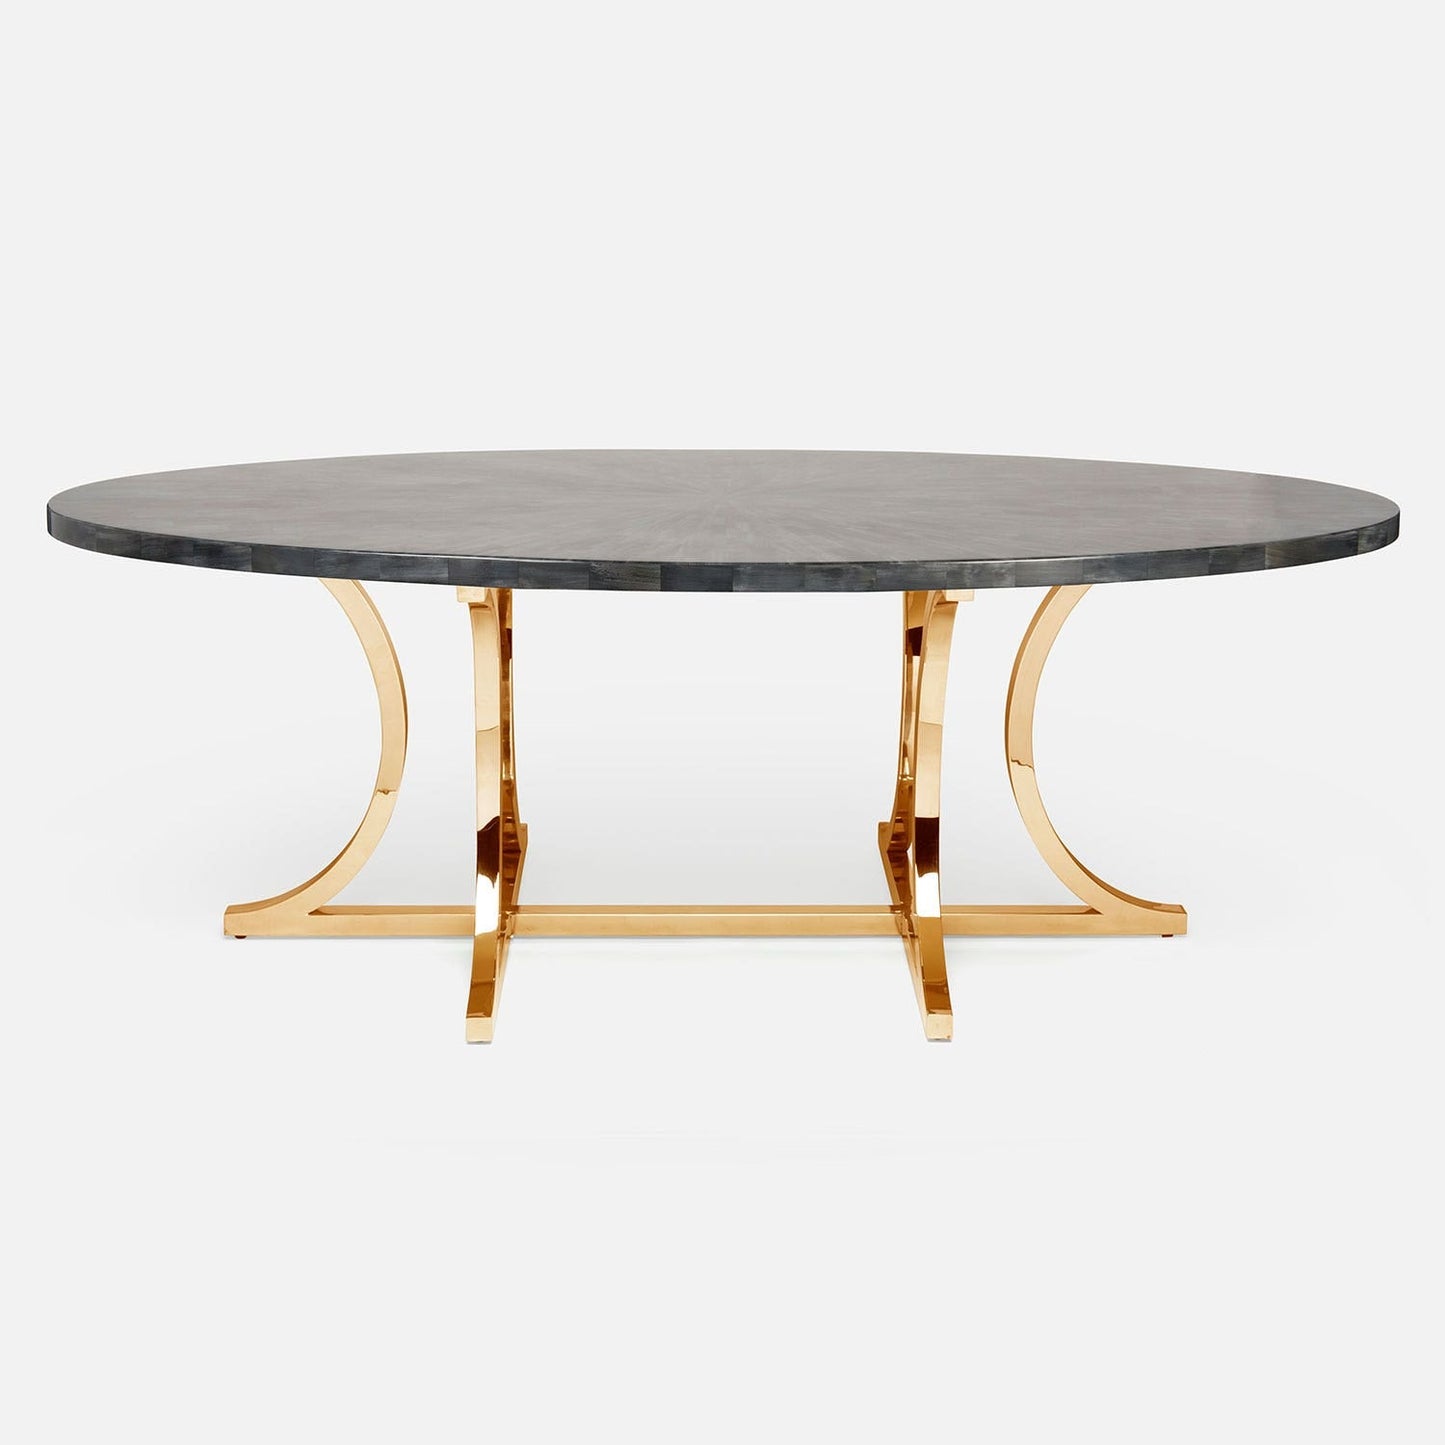 Made Goods Leighton 96" x 44" x 30" Polished Gold Steel Dinning Table With Oval Dark Faux Horn Table Top